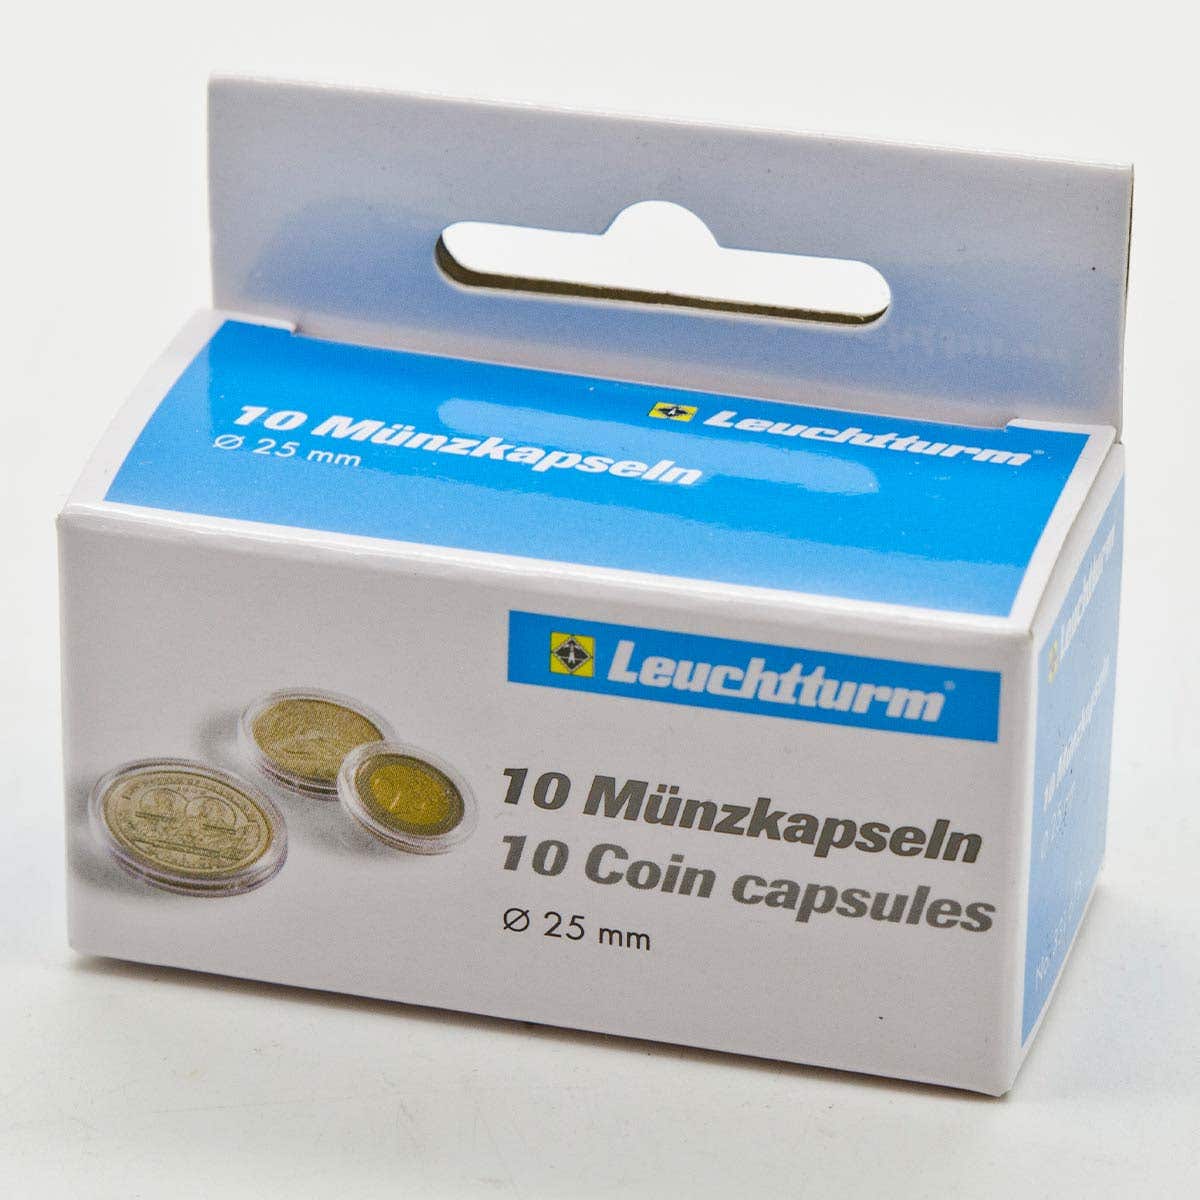 25mm Round Coin Capsules Box of 10